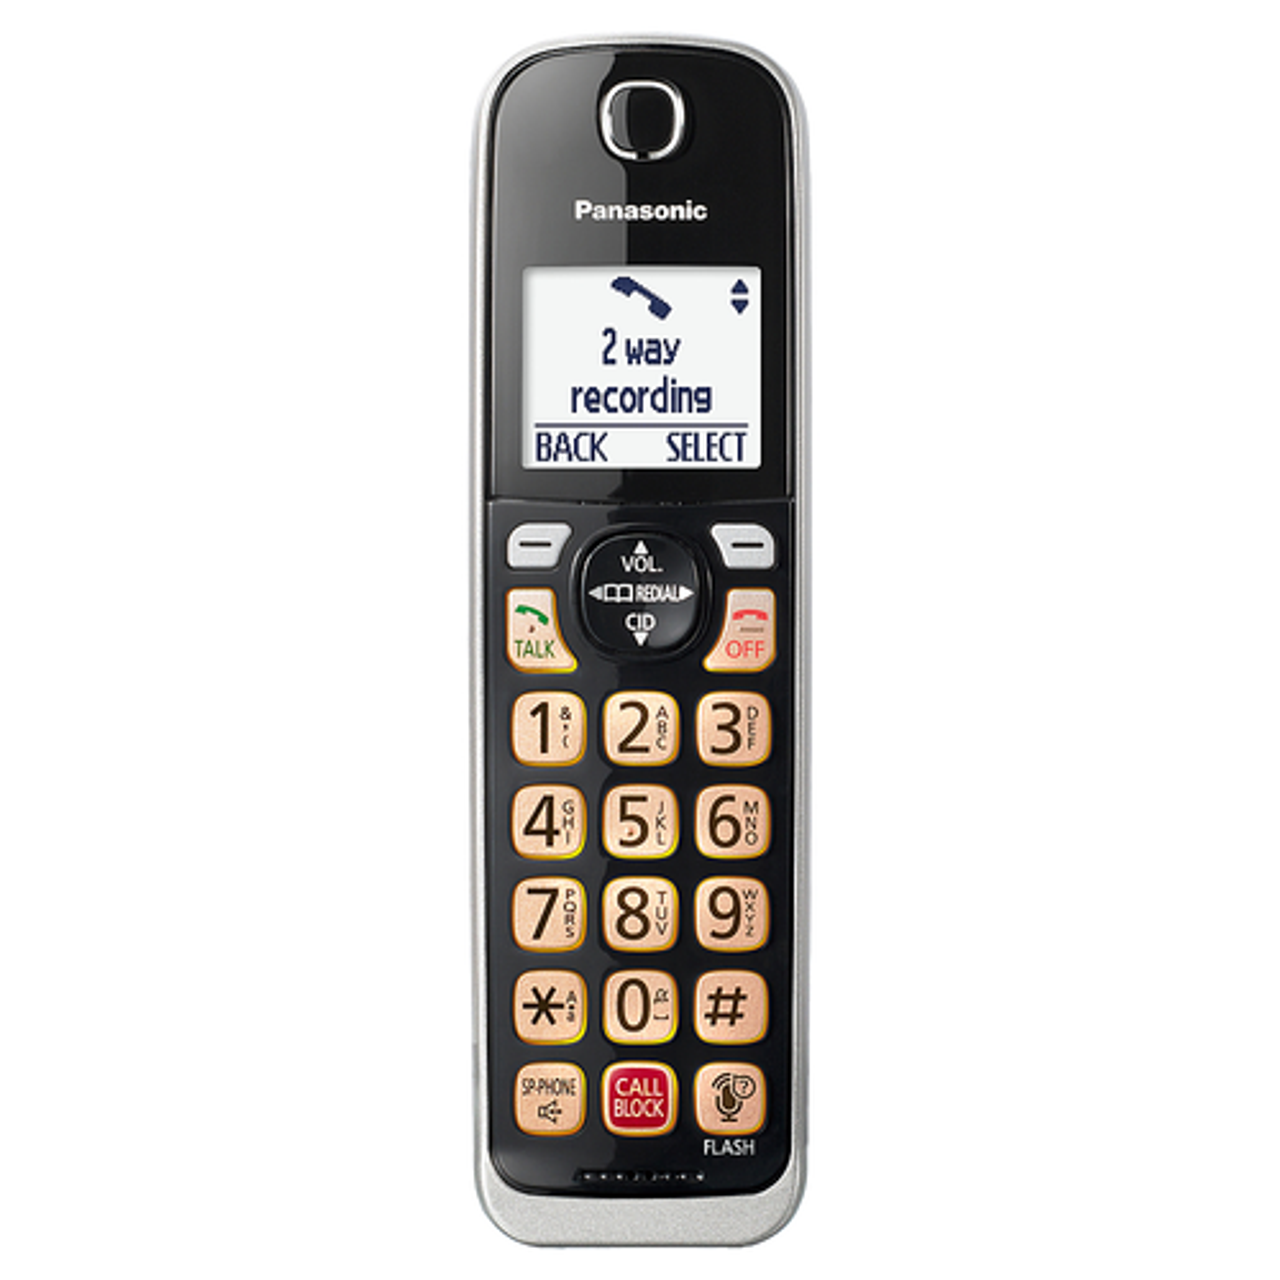 Panasonic - KX-TGDA86S Additional Handset for use with KX-TGD86x Series Cordless Phone Systems - Black with Silver Trim